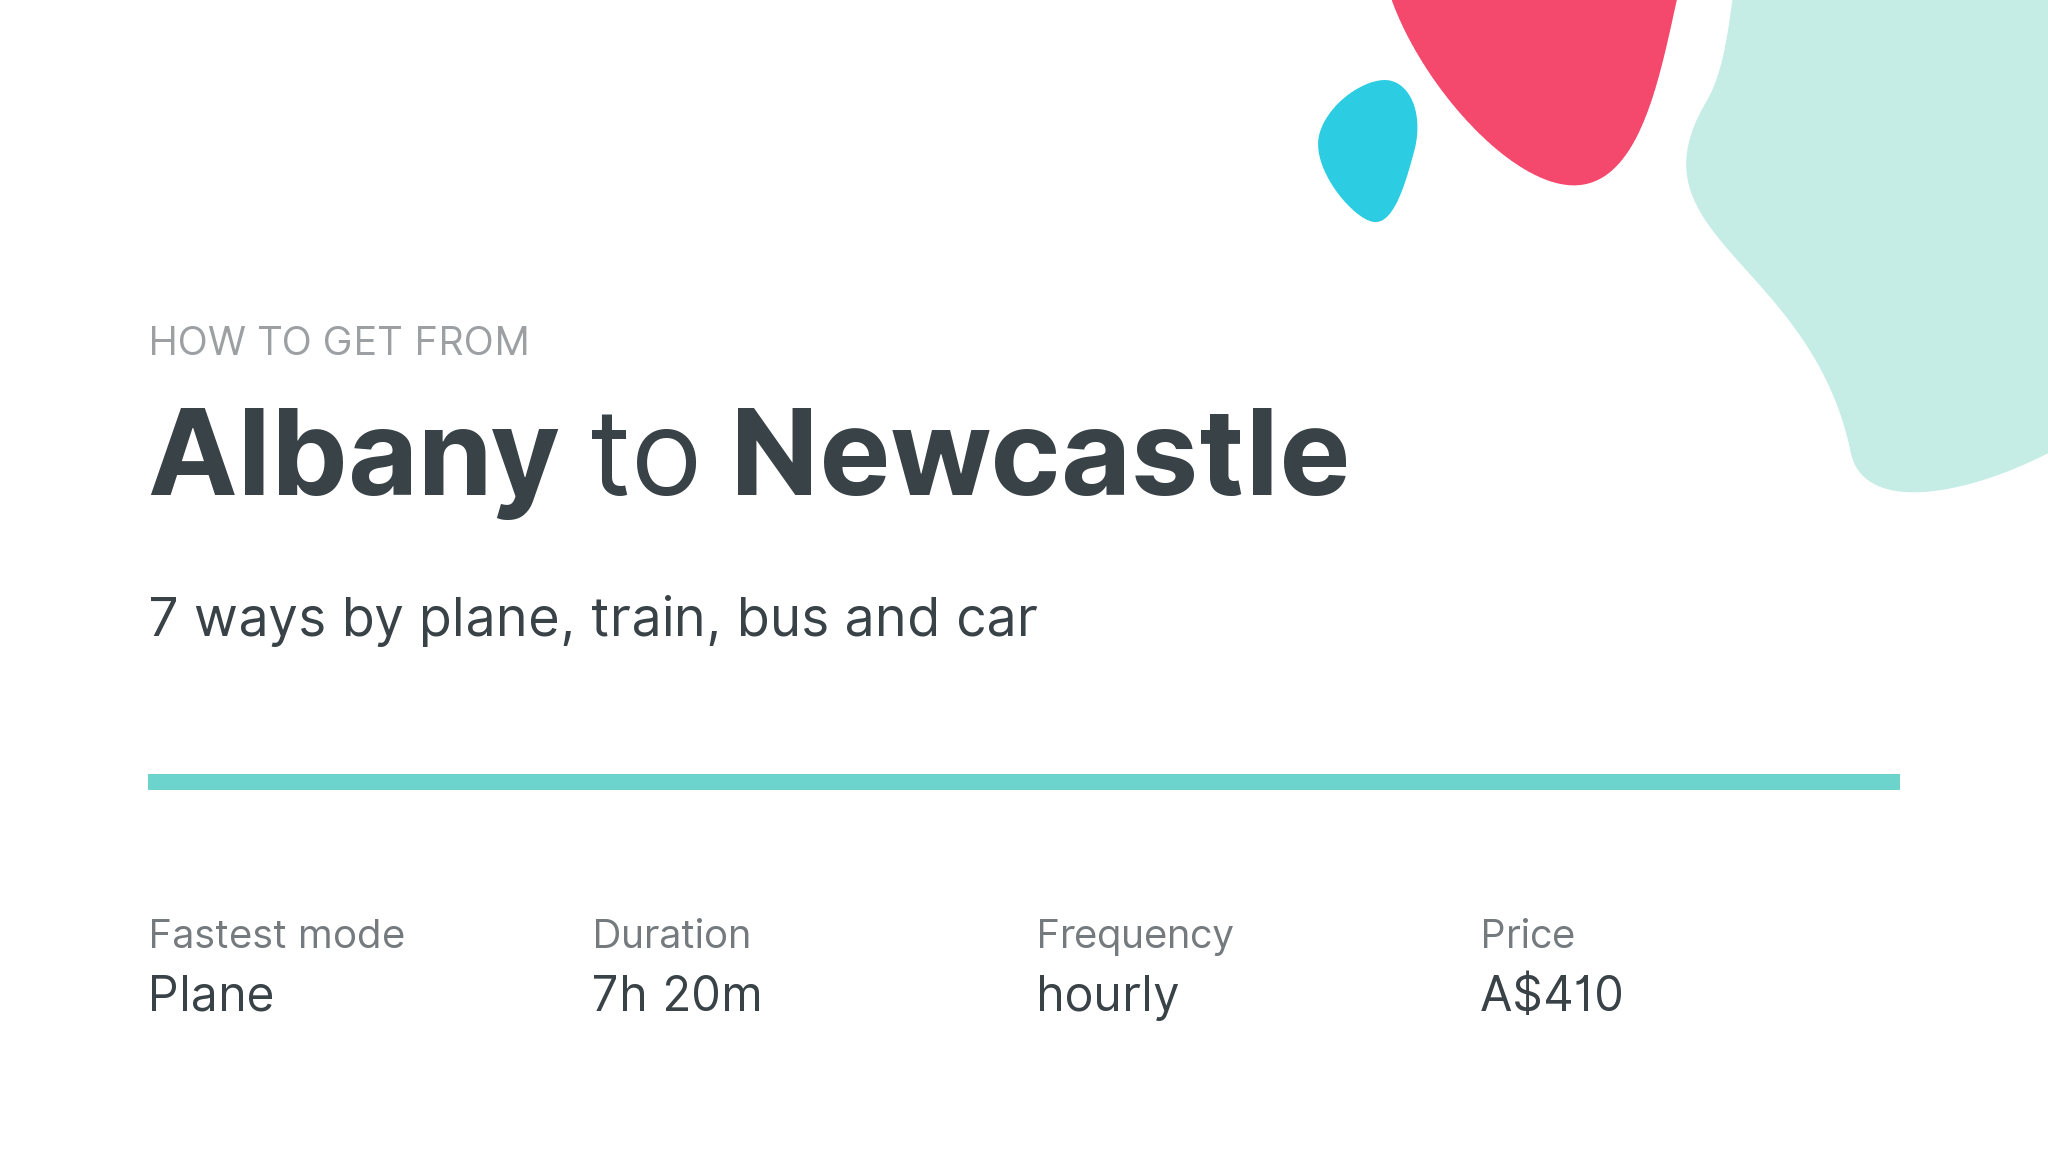 How do I get from Albany to Newcastle